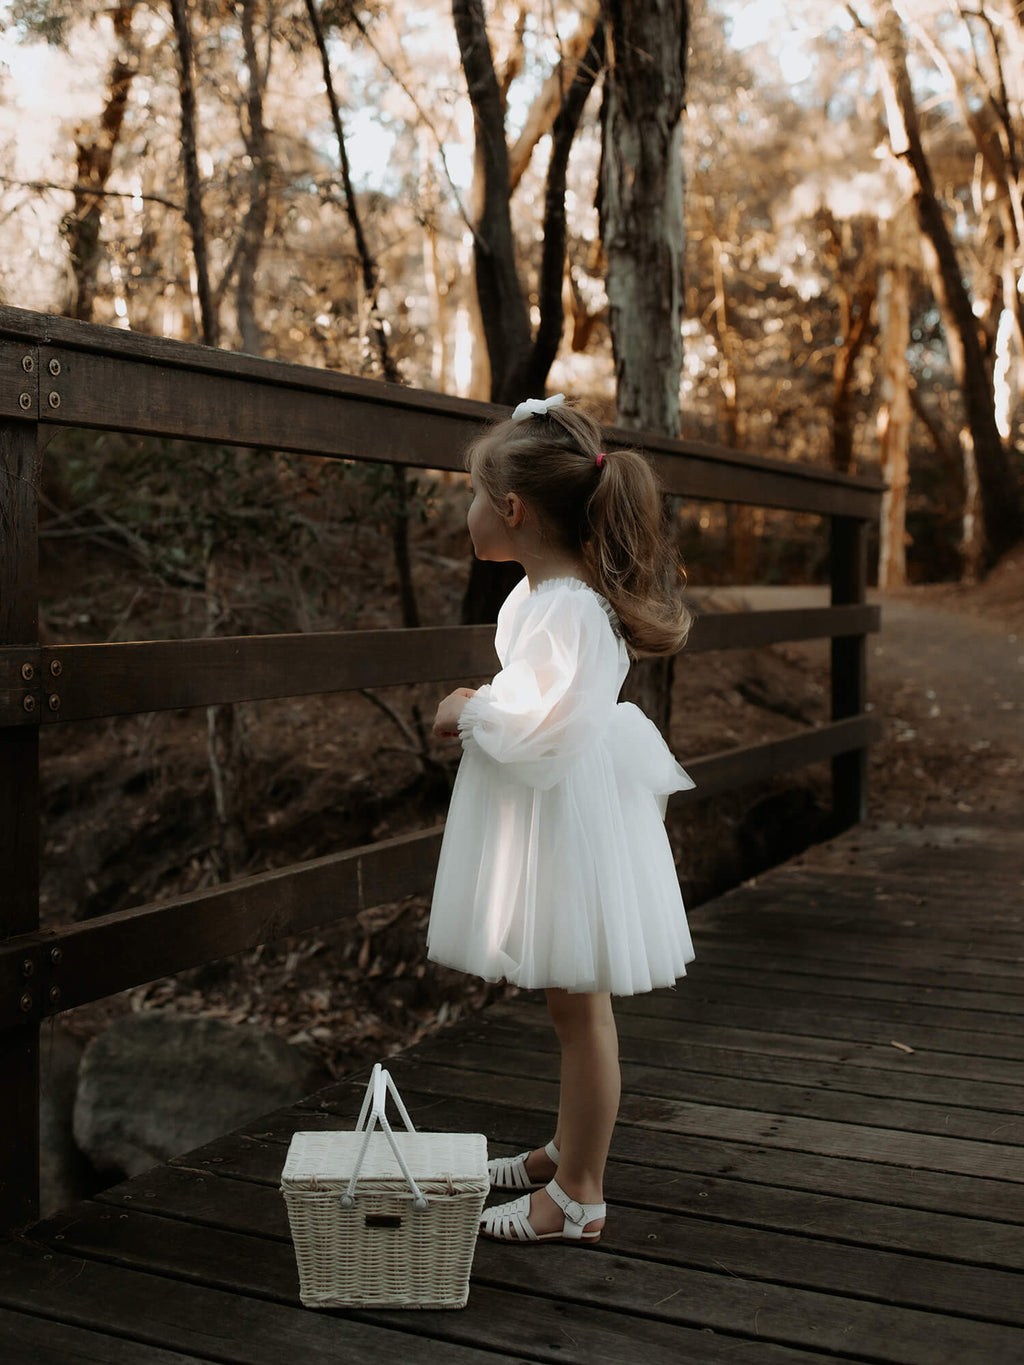 Eva tulle sleeve flower girl dress in ivory is worn by a young girl standing on a bridge. She wears a small ivory tulle bow in her hair, and stands with a flower girl basket at her feet.